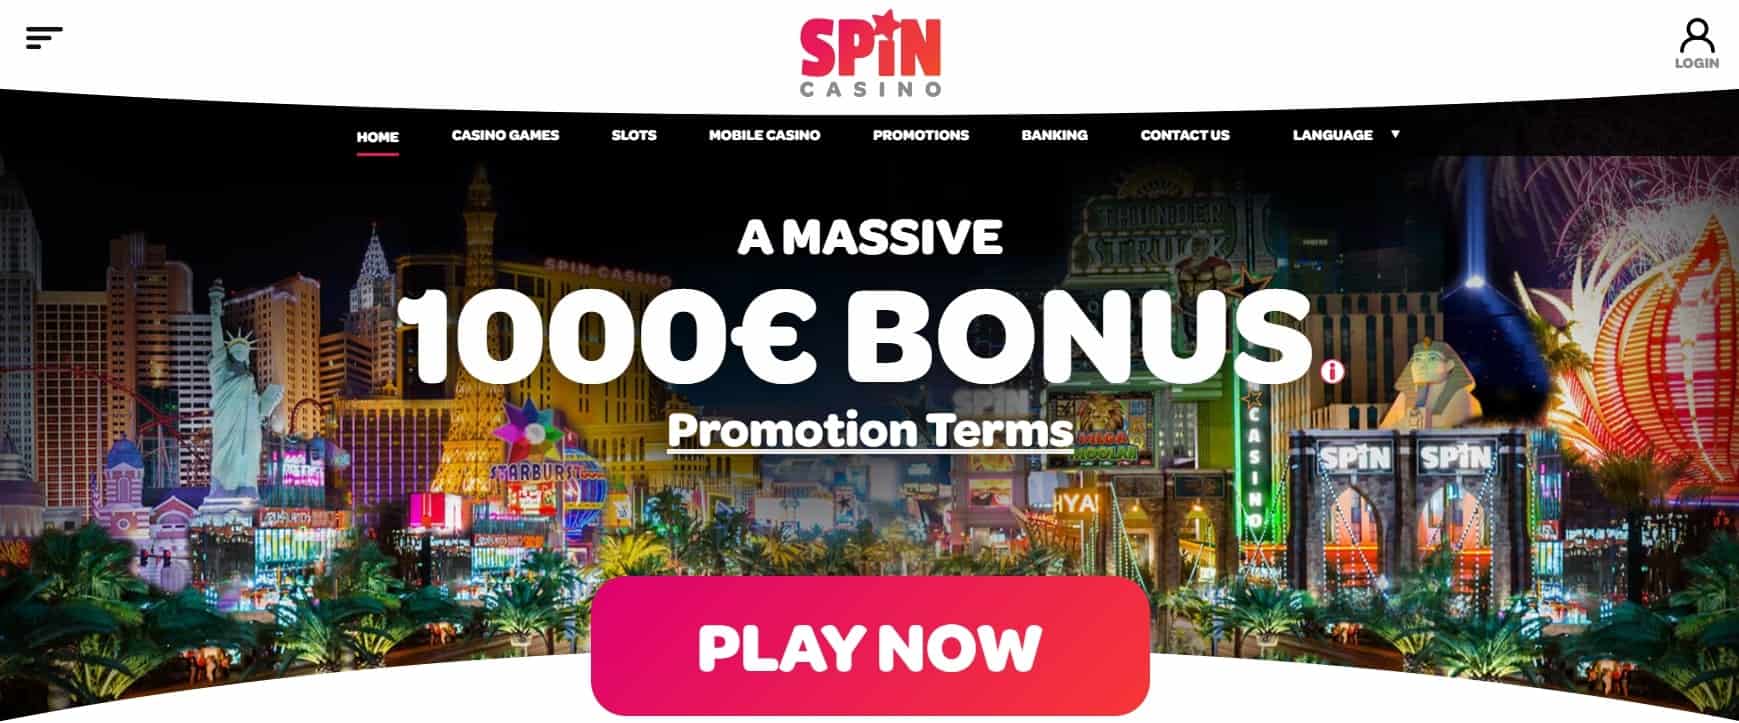 spin banner